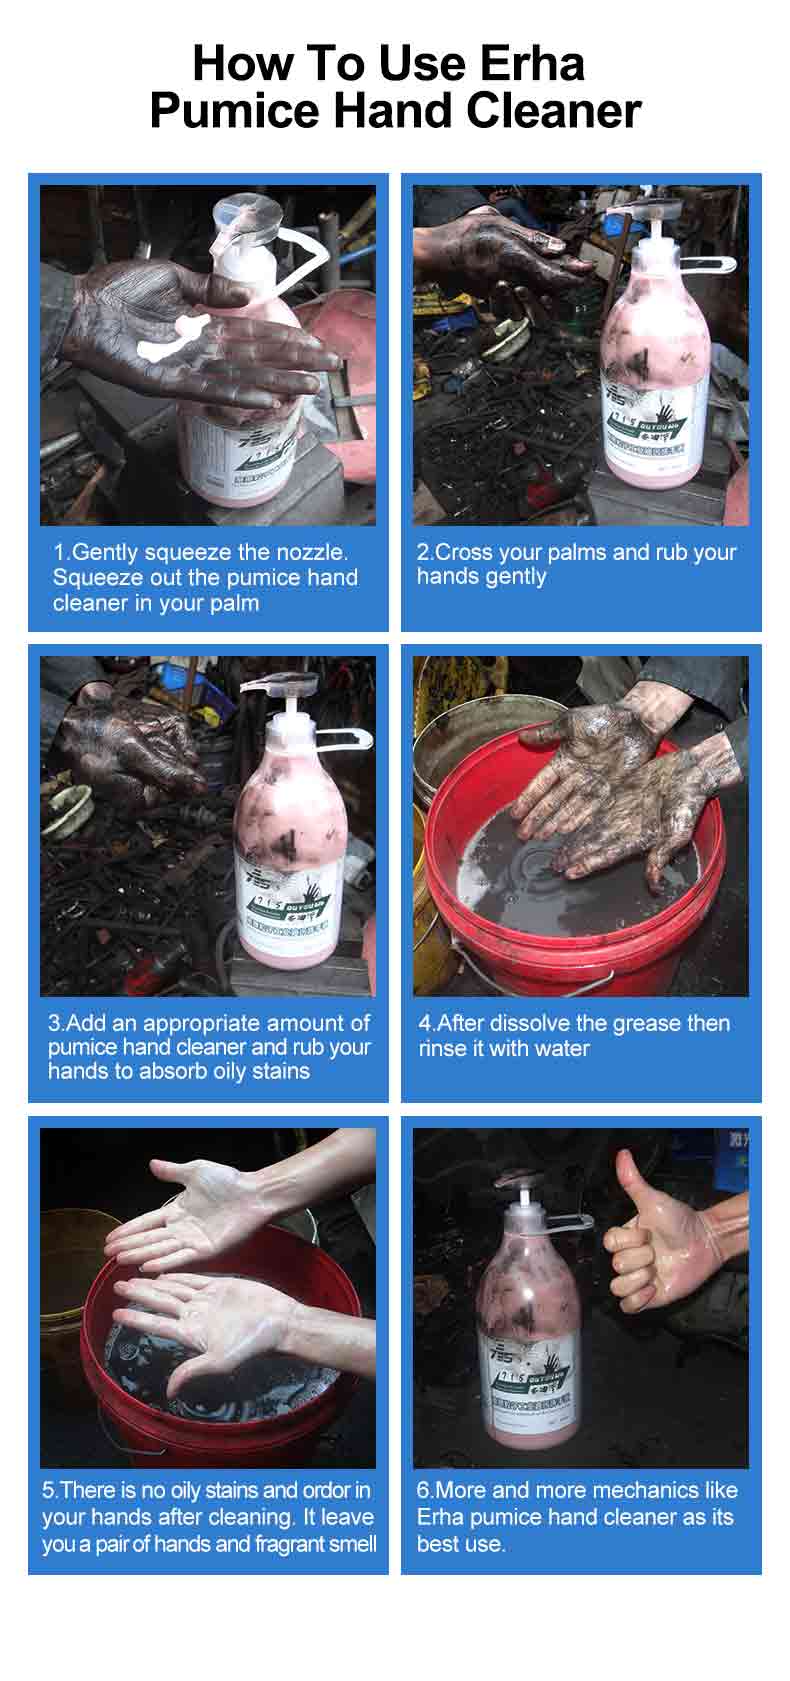 How to use Erha pumice hand cleaner